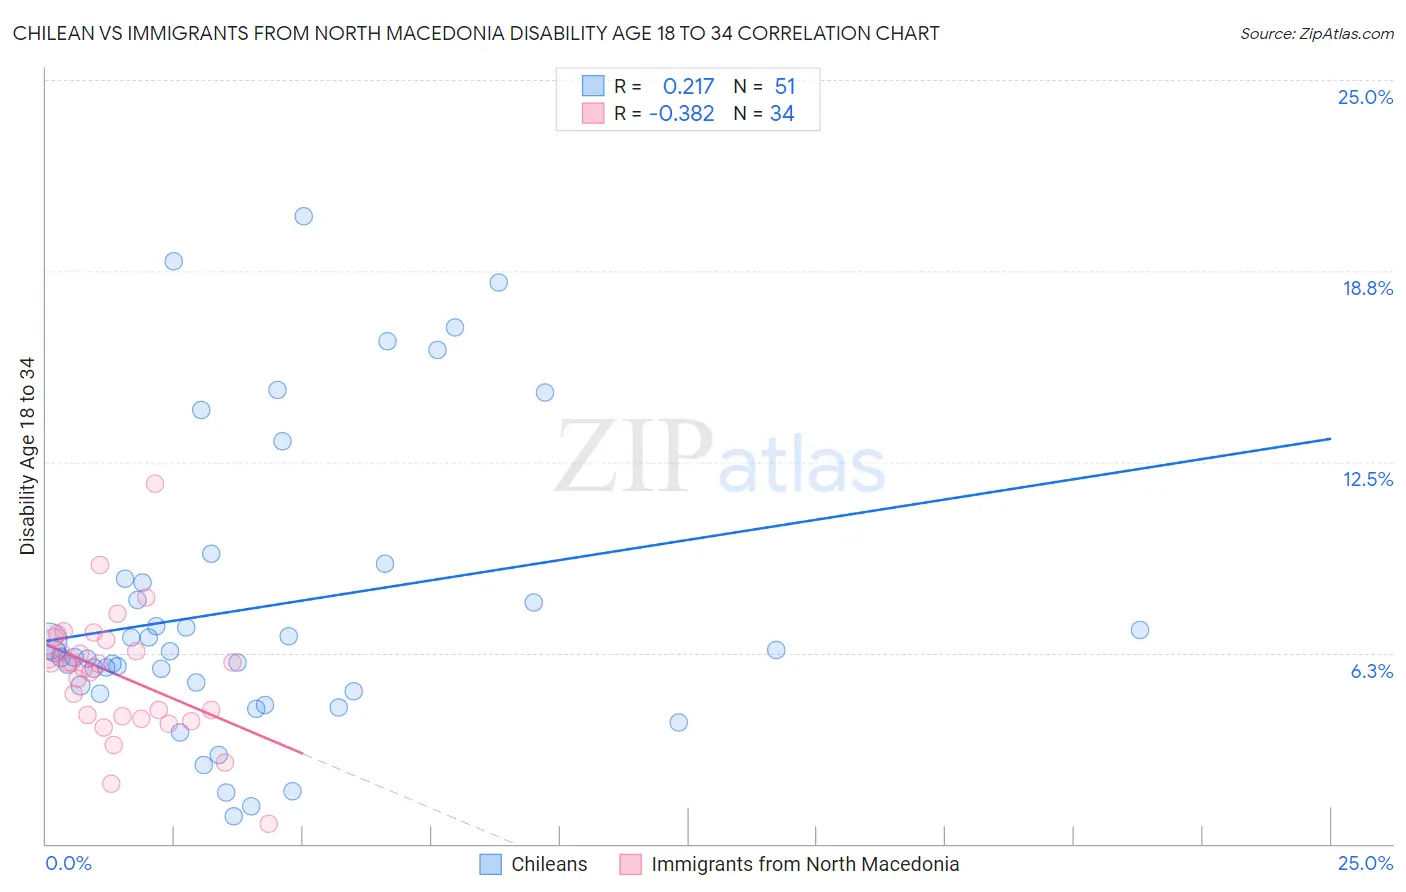 Chilean vs Immigrants from North Macedonia Disability Age 18 to 34